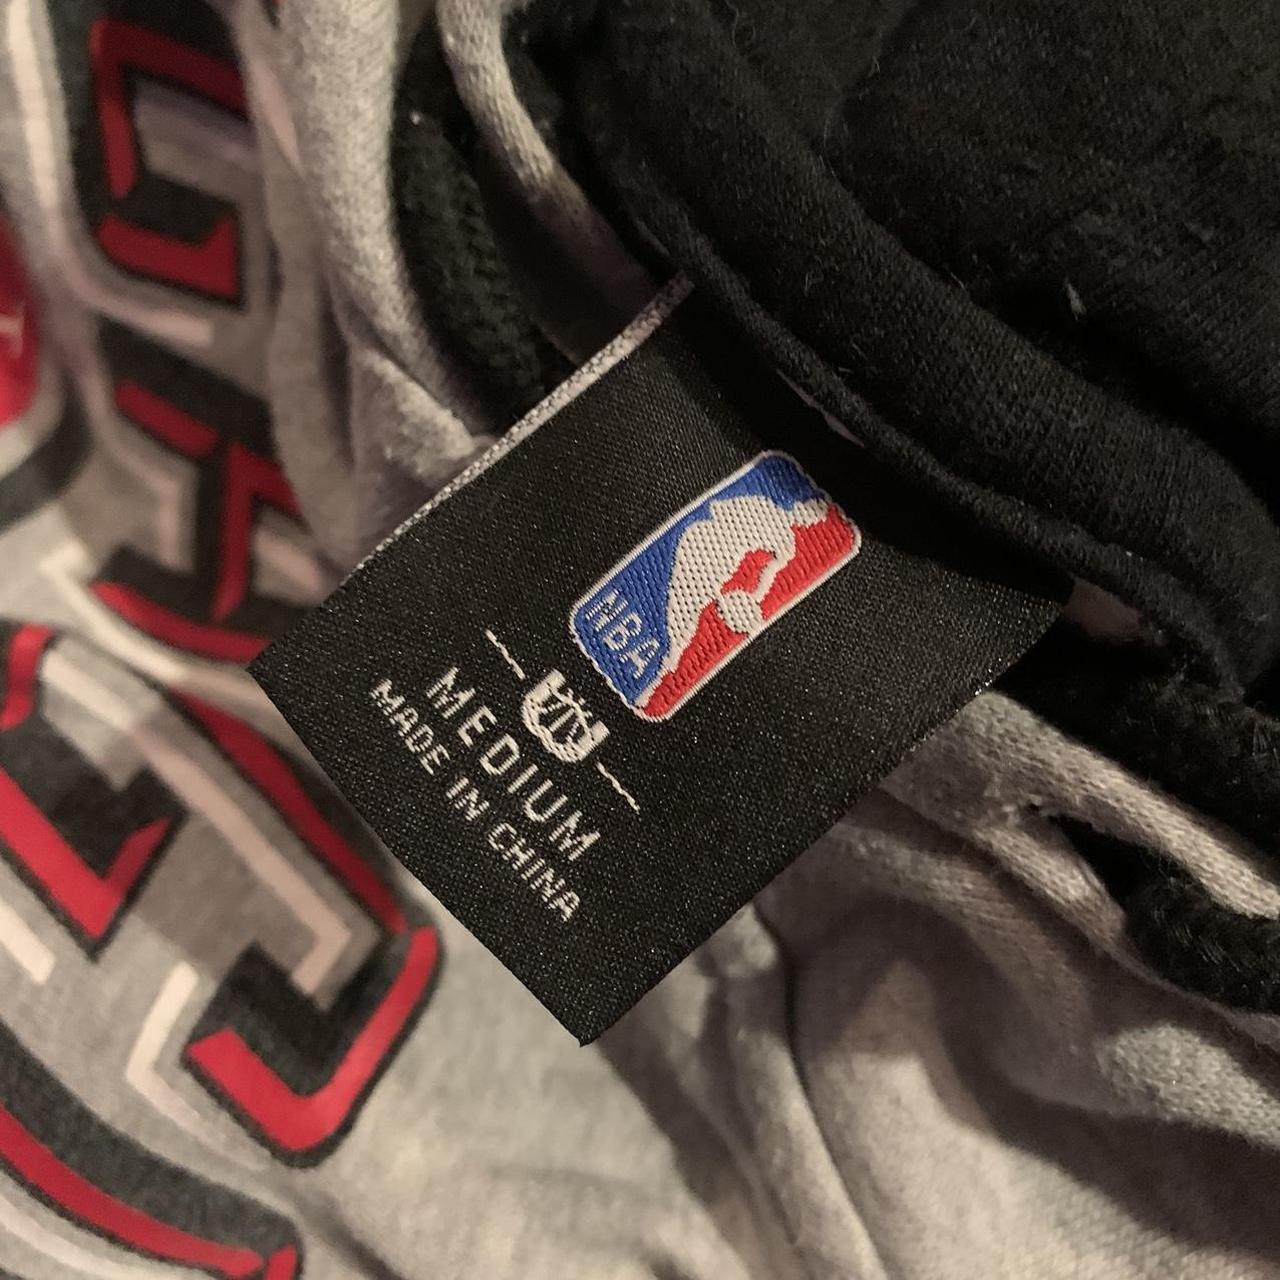 NBA Men's White and Red Hoodie (2)